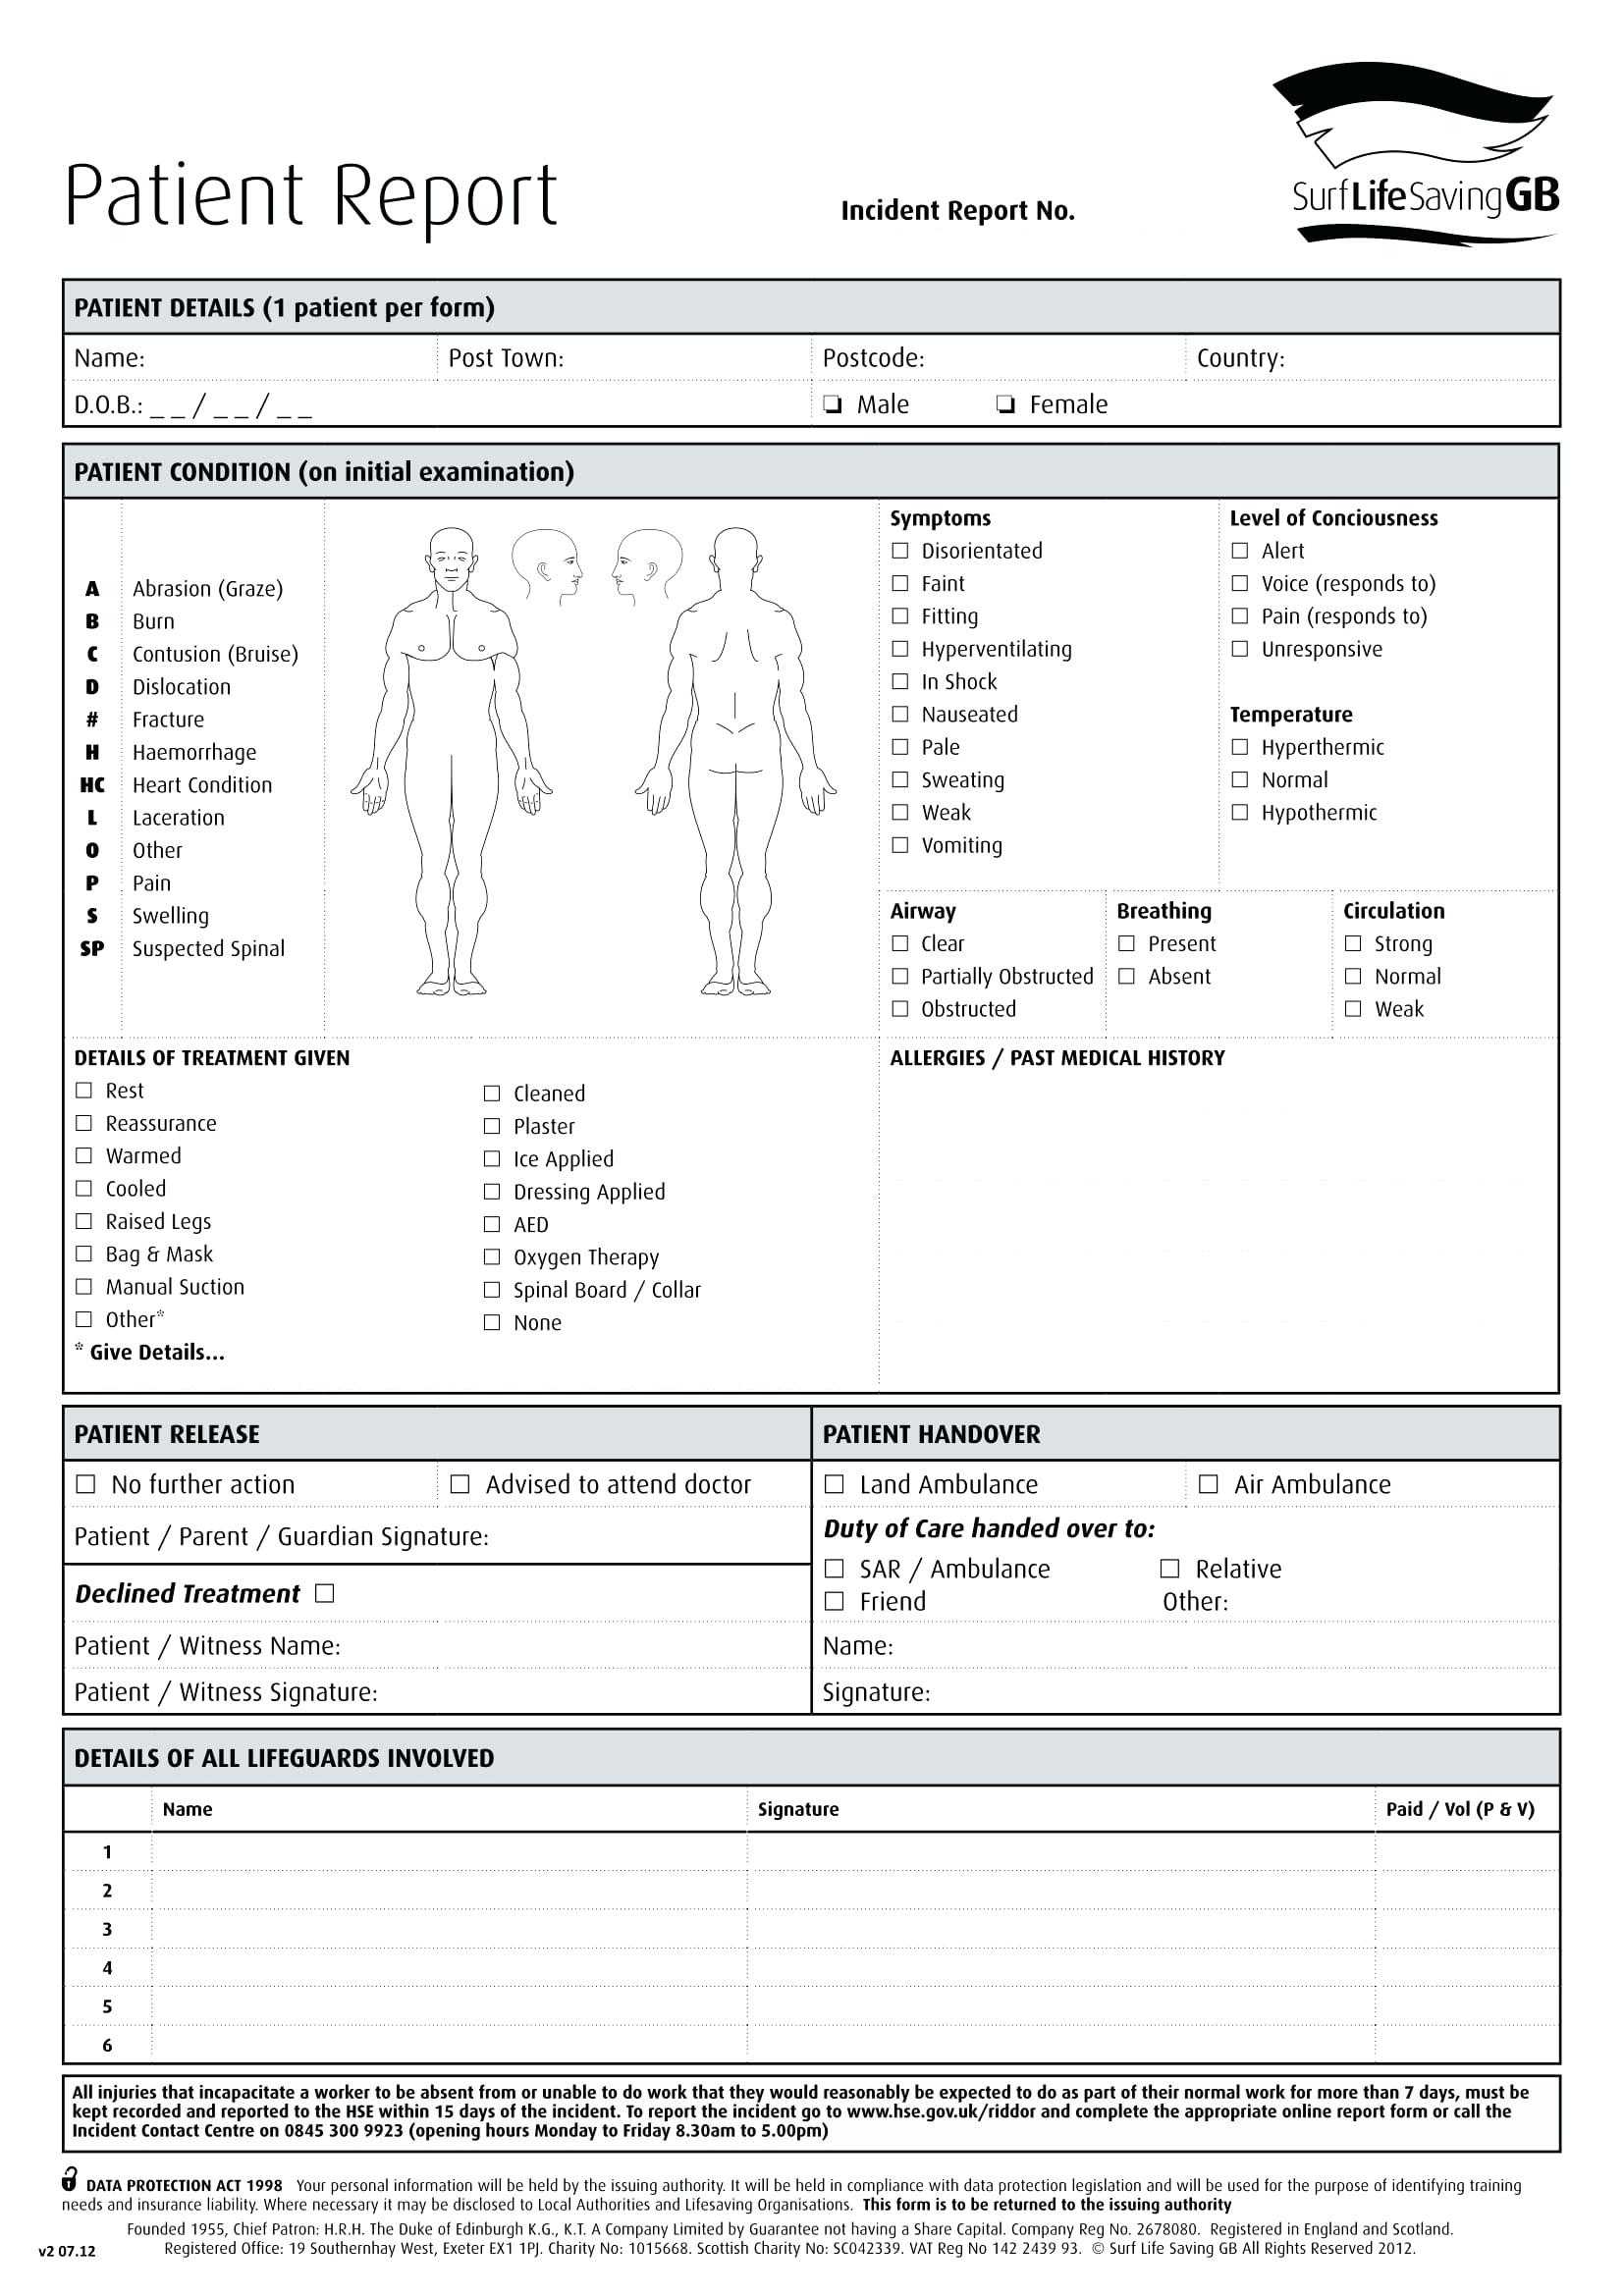 Incident Report Form Template Free Download – Vmarques Regarding Incident Report Form Template Word